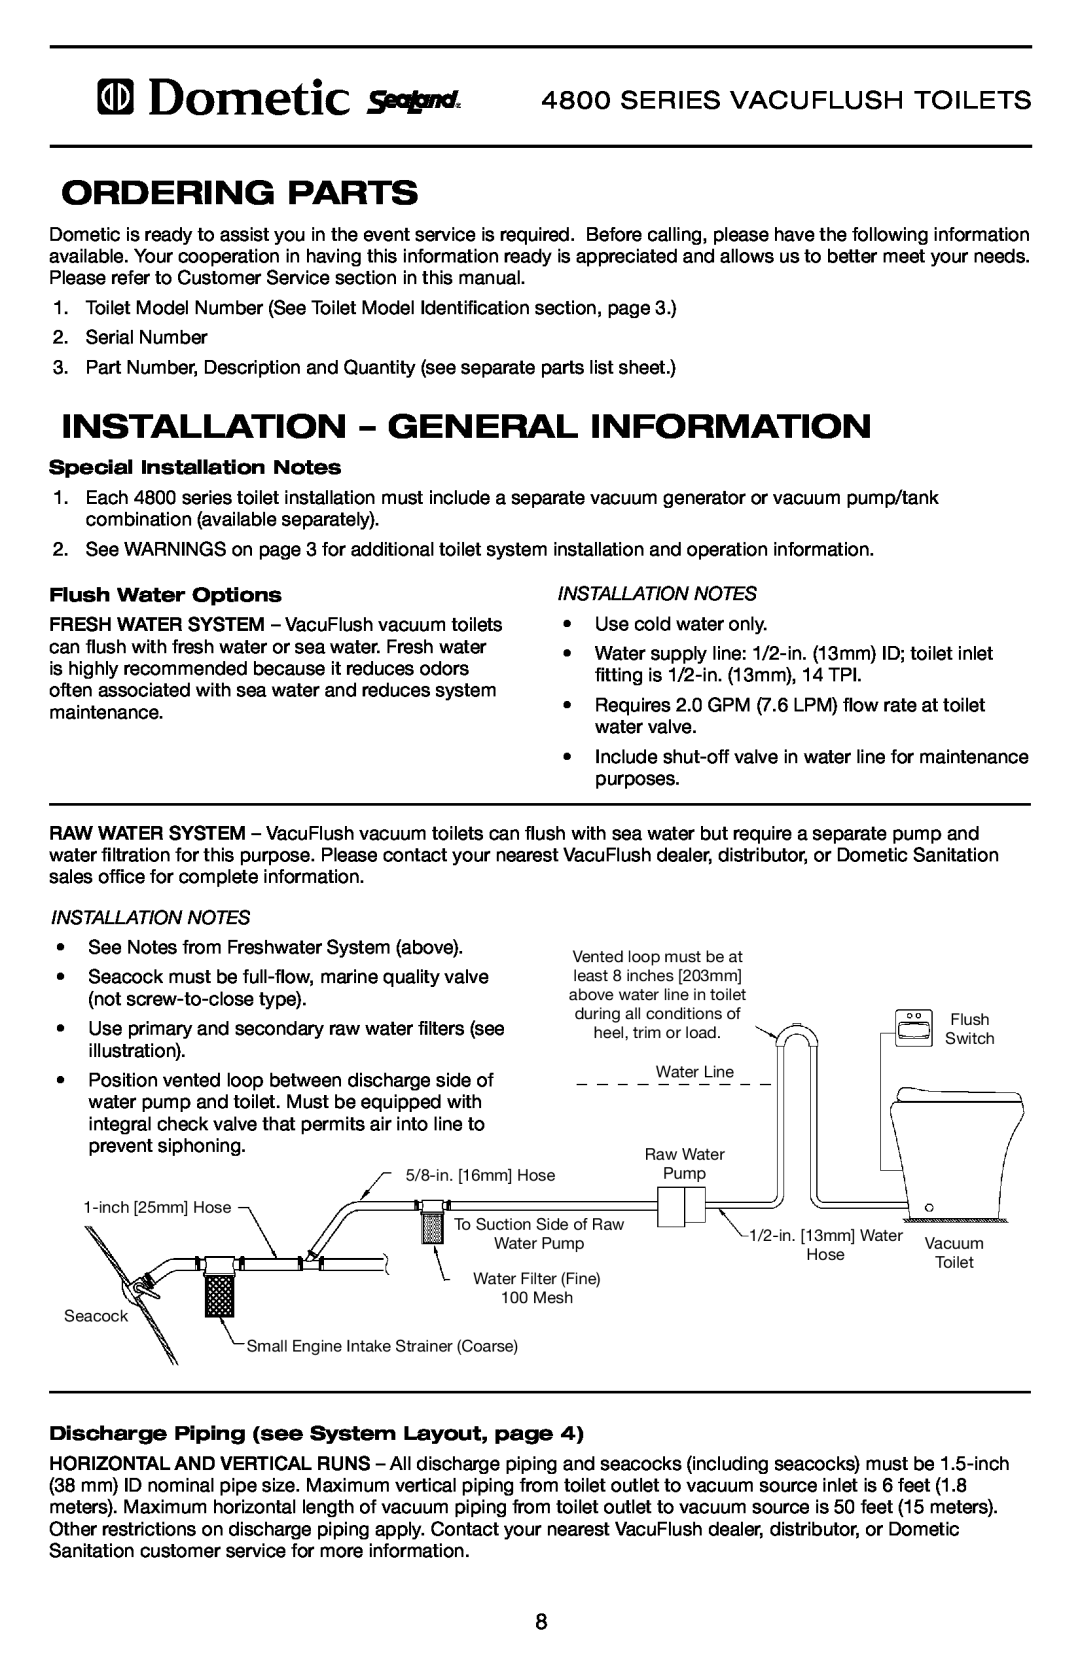 Dometic 4848, 4809 Ordering Parts, Installation - General Information, Special Installation Notes, Flush Water Options 